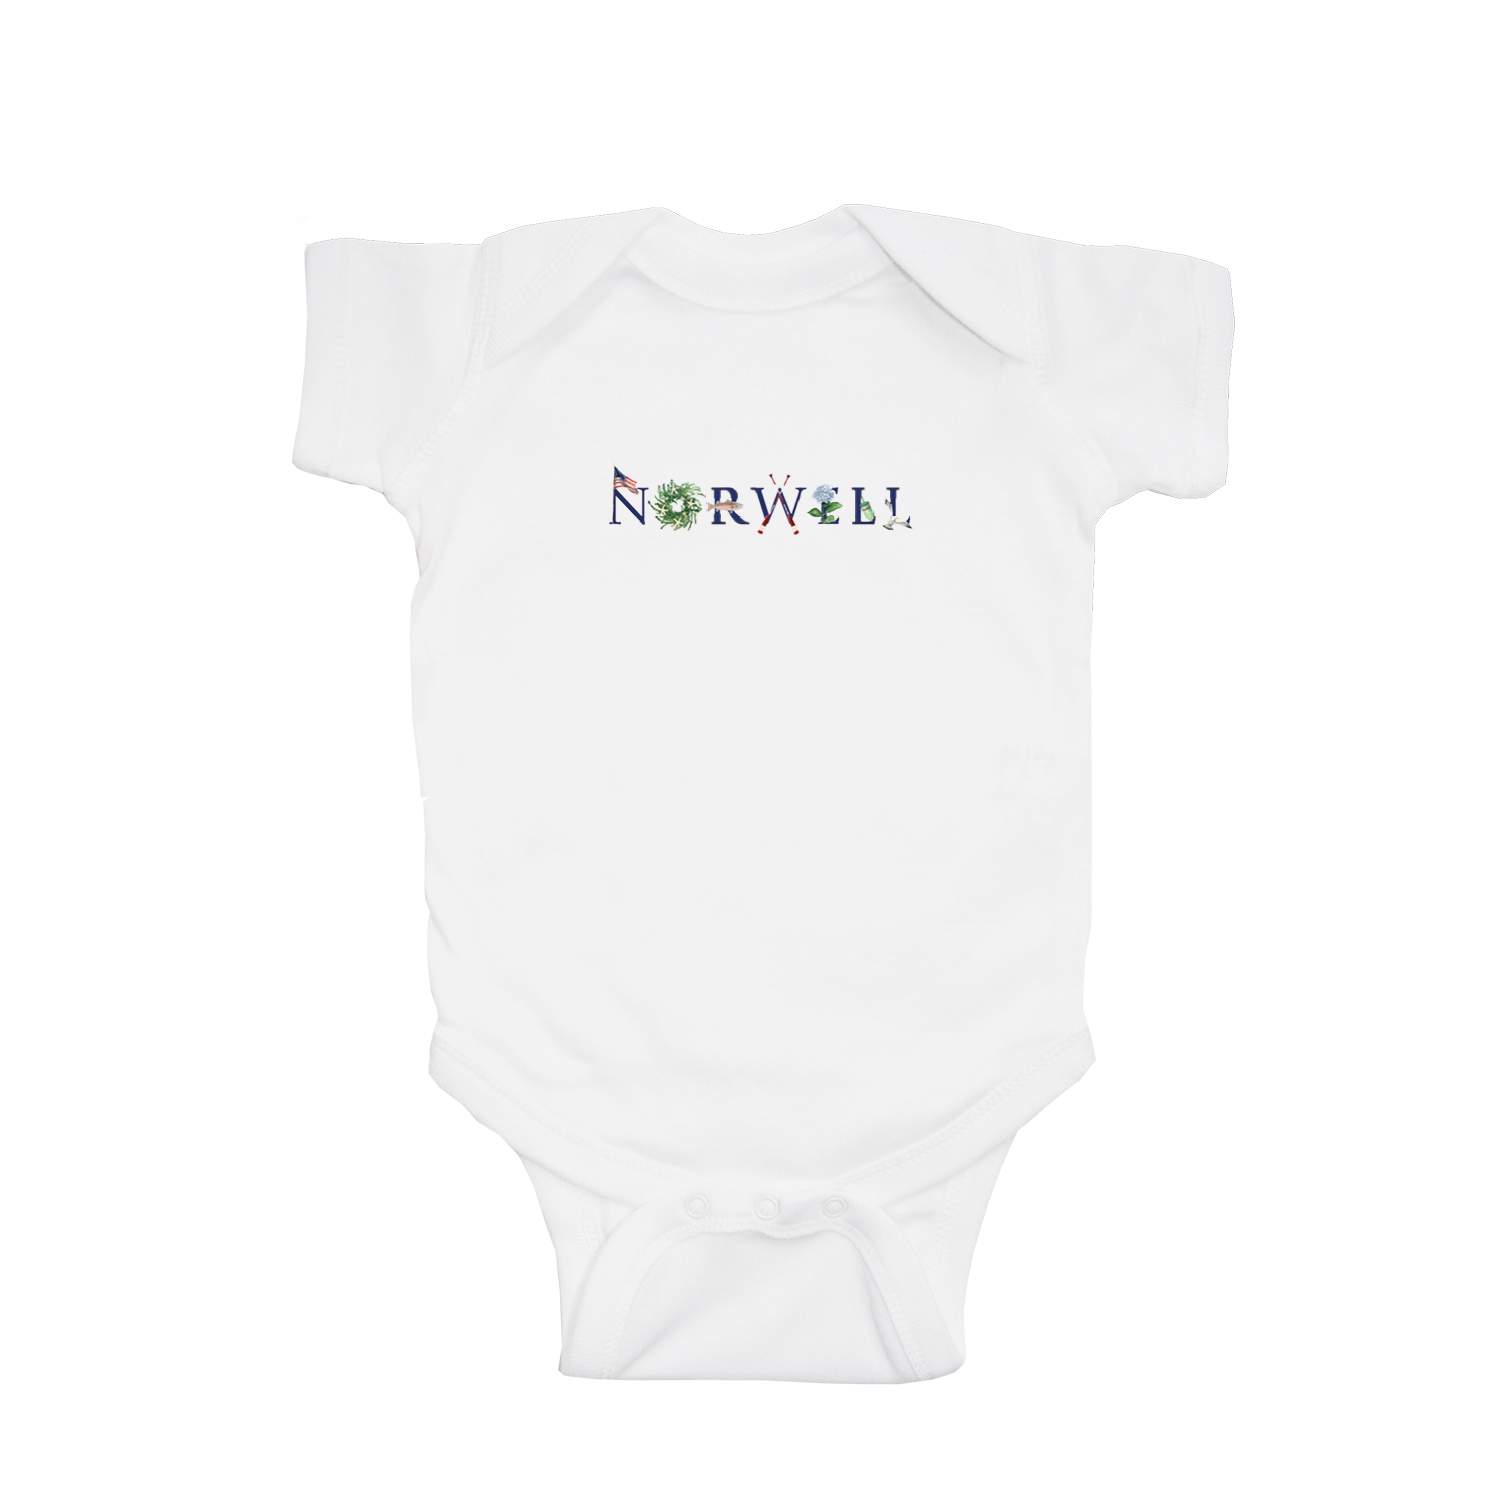 Norwell baby snap up short sleeve